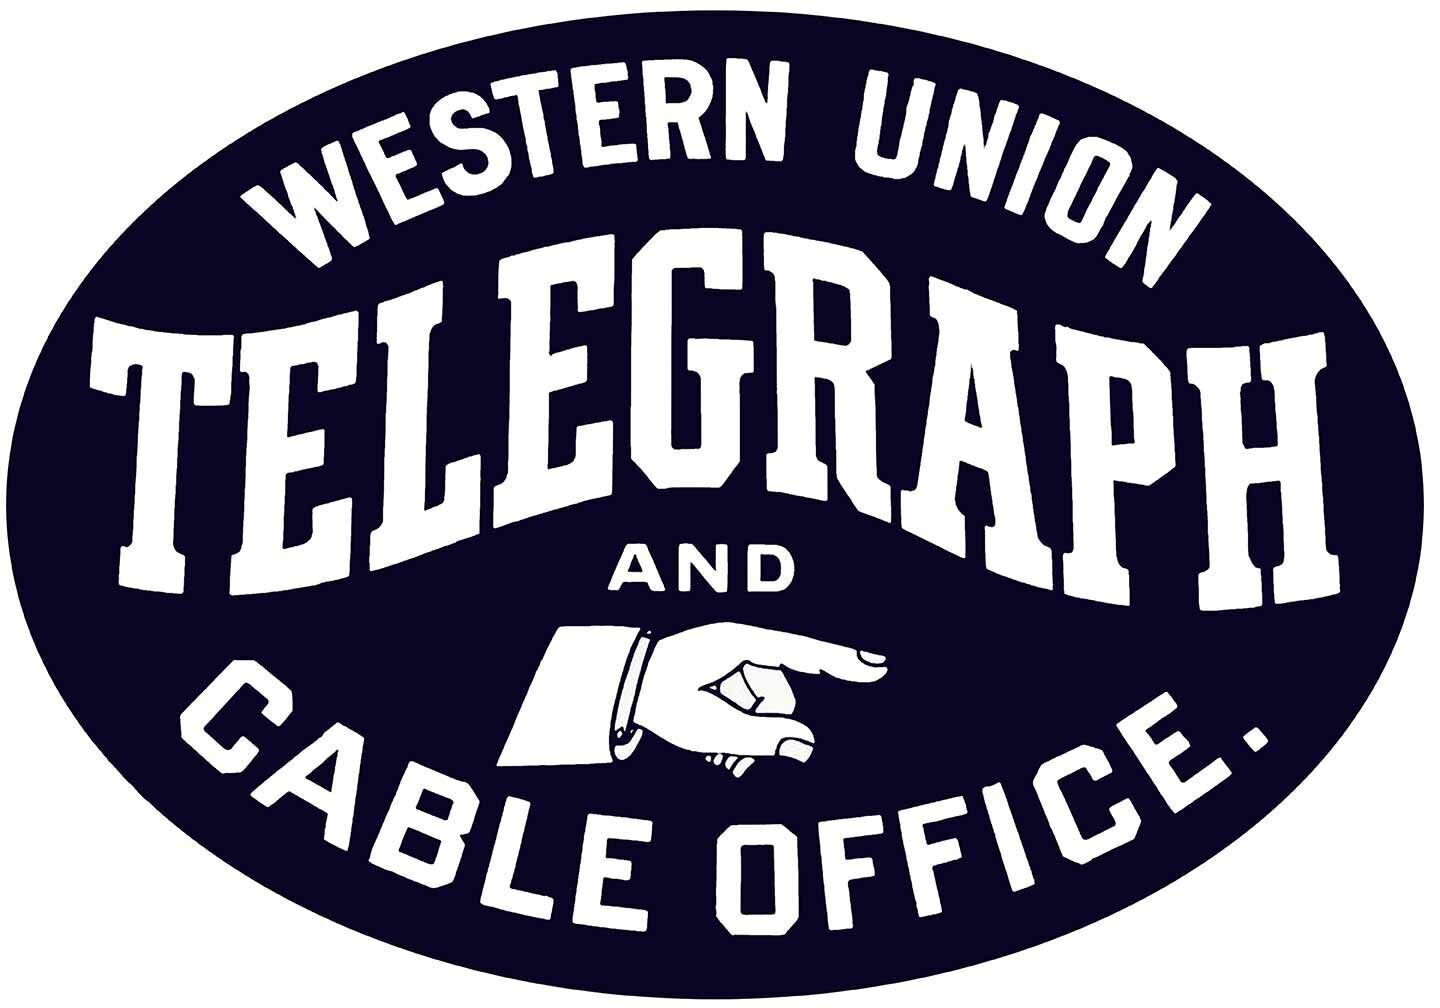 WESTERN UNION TELEGRAPH CABLE 20